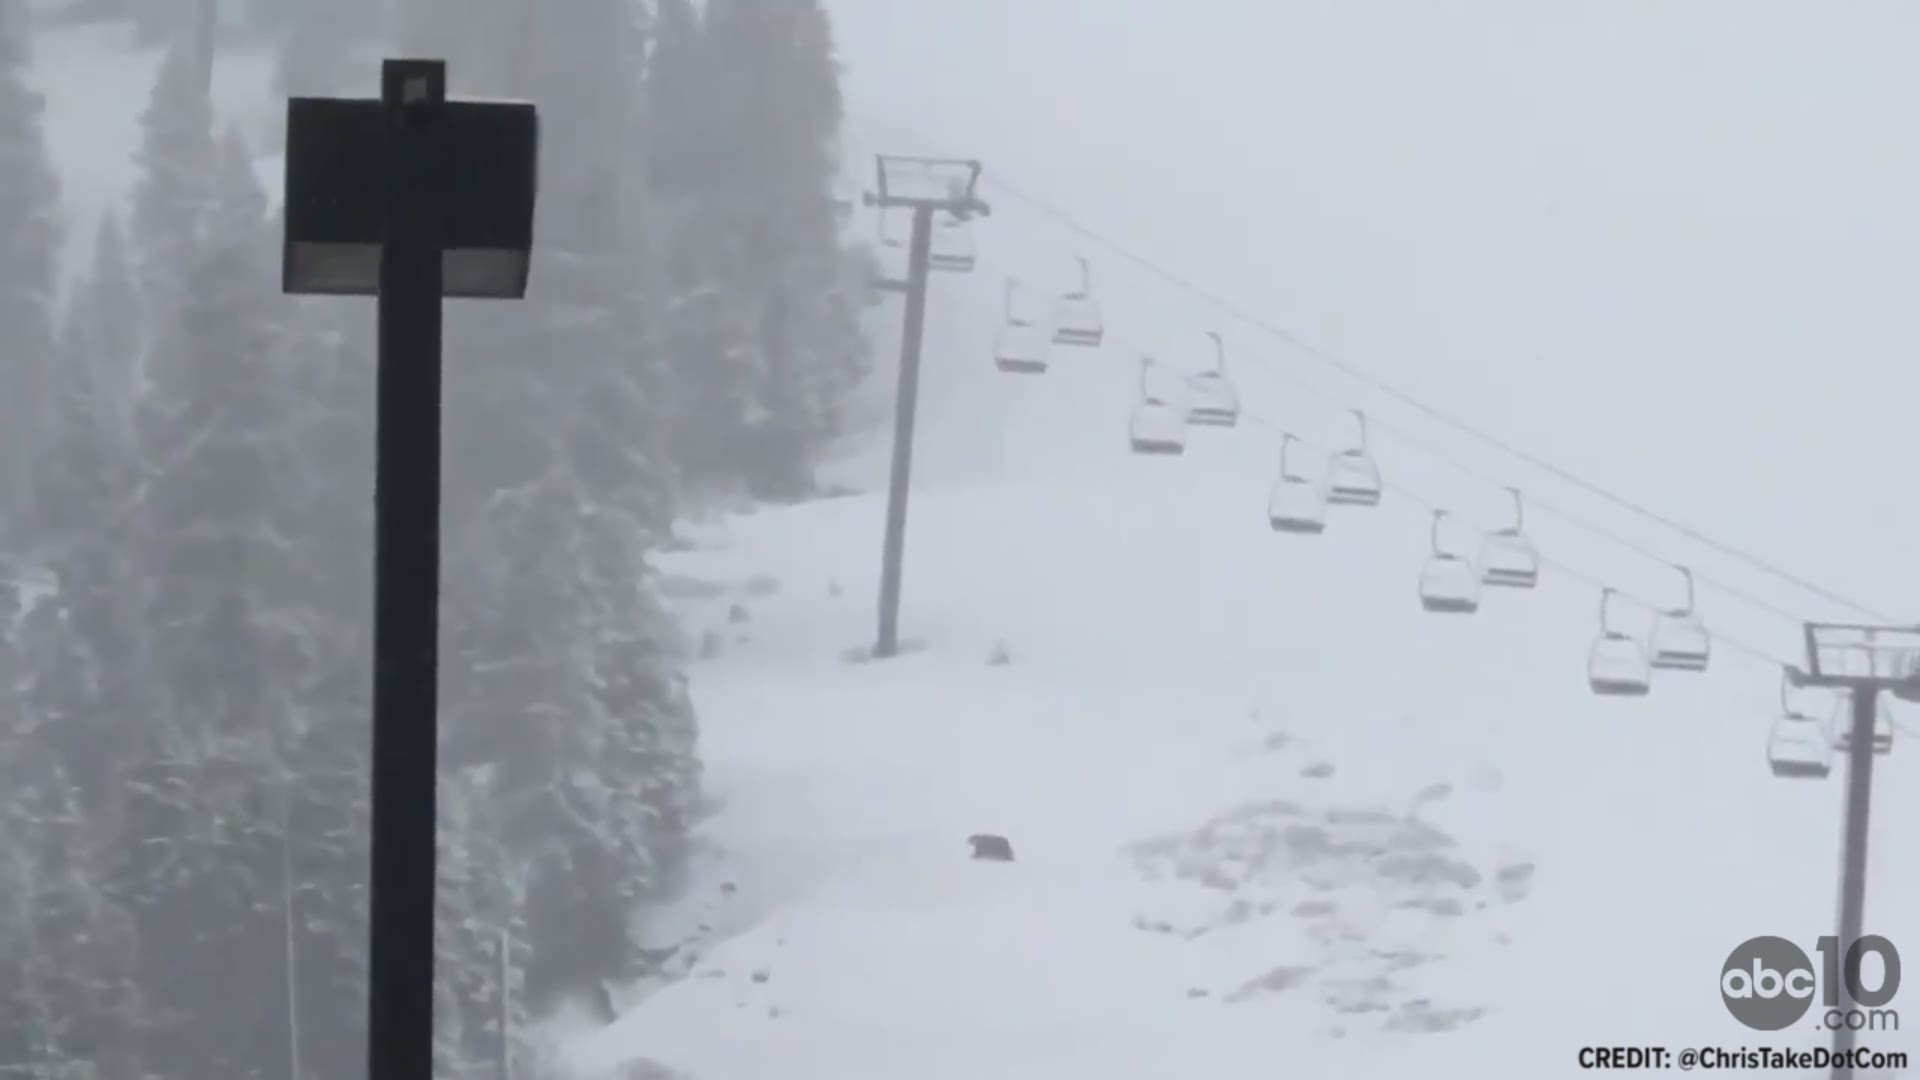 Twitter User @ChrisTakeDotCom captured this video of a bear roaming in the snow at Squaw Valley on May 16.